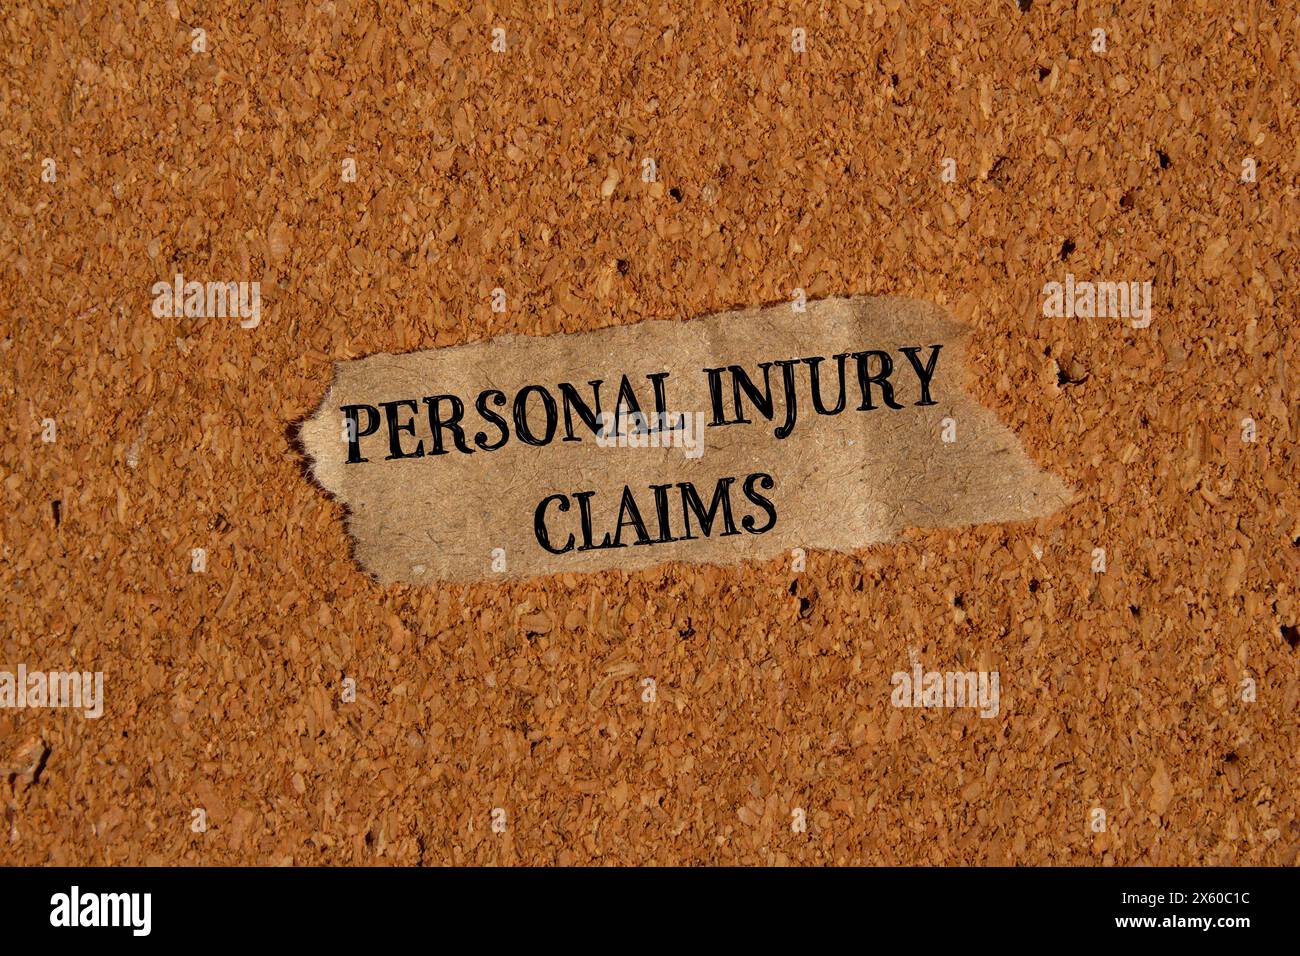 Personal injury claims words written on ripped paper piece with brown background. Conceptual personal injury claims symbol. Copy space. Stock Photo